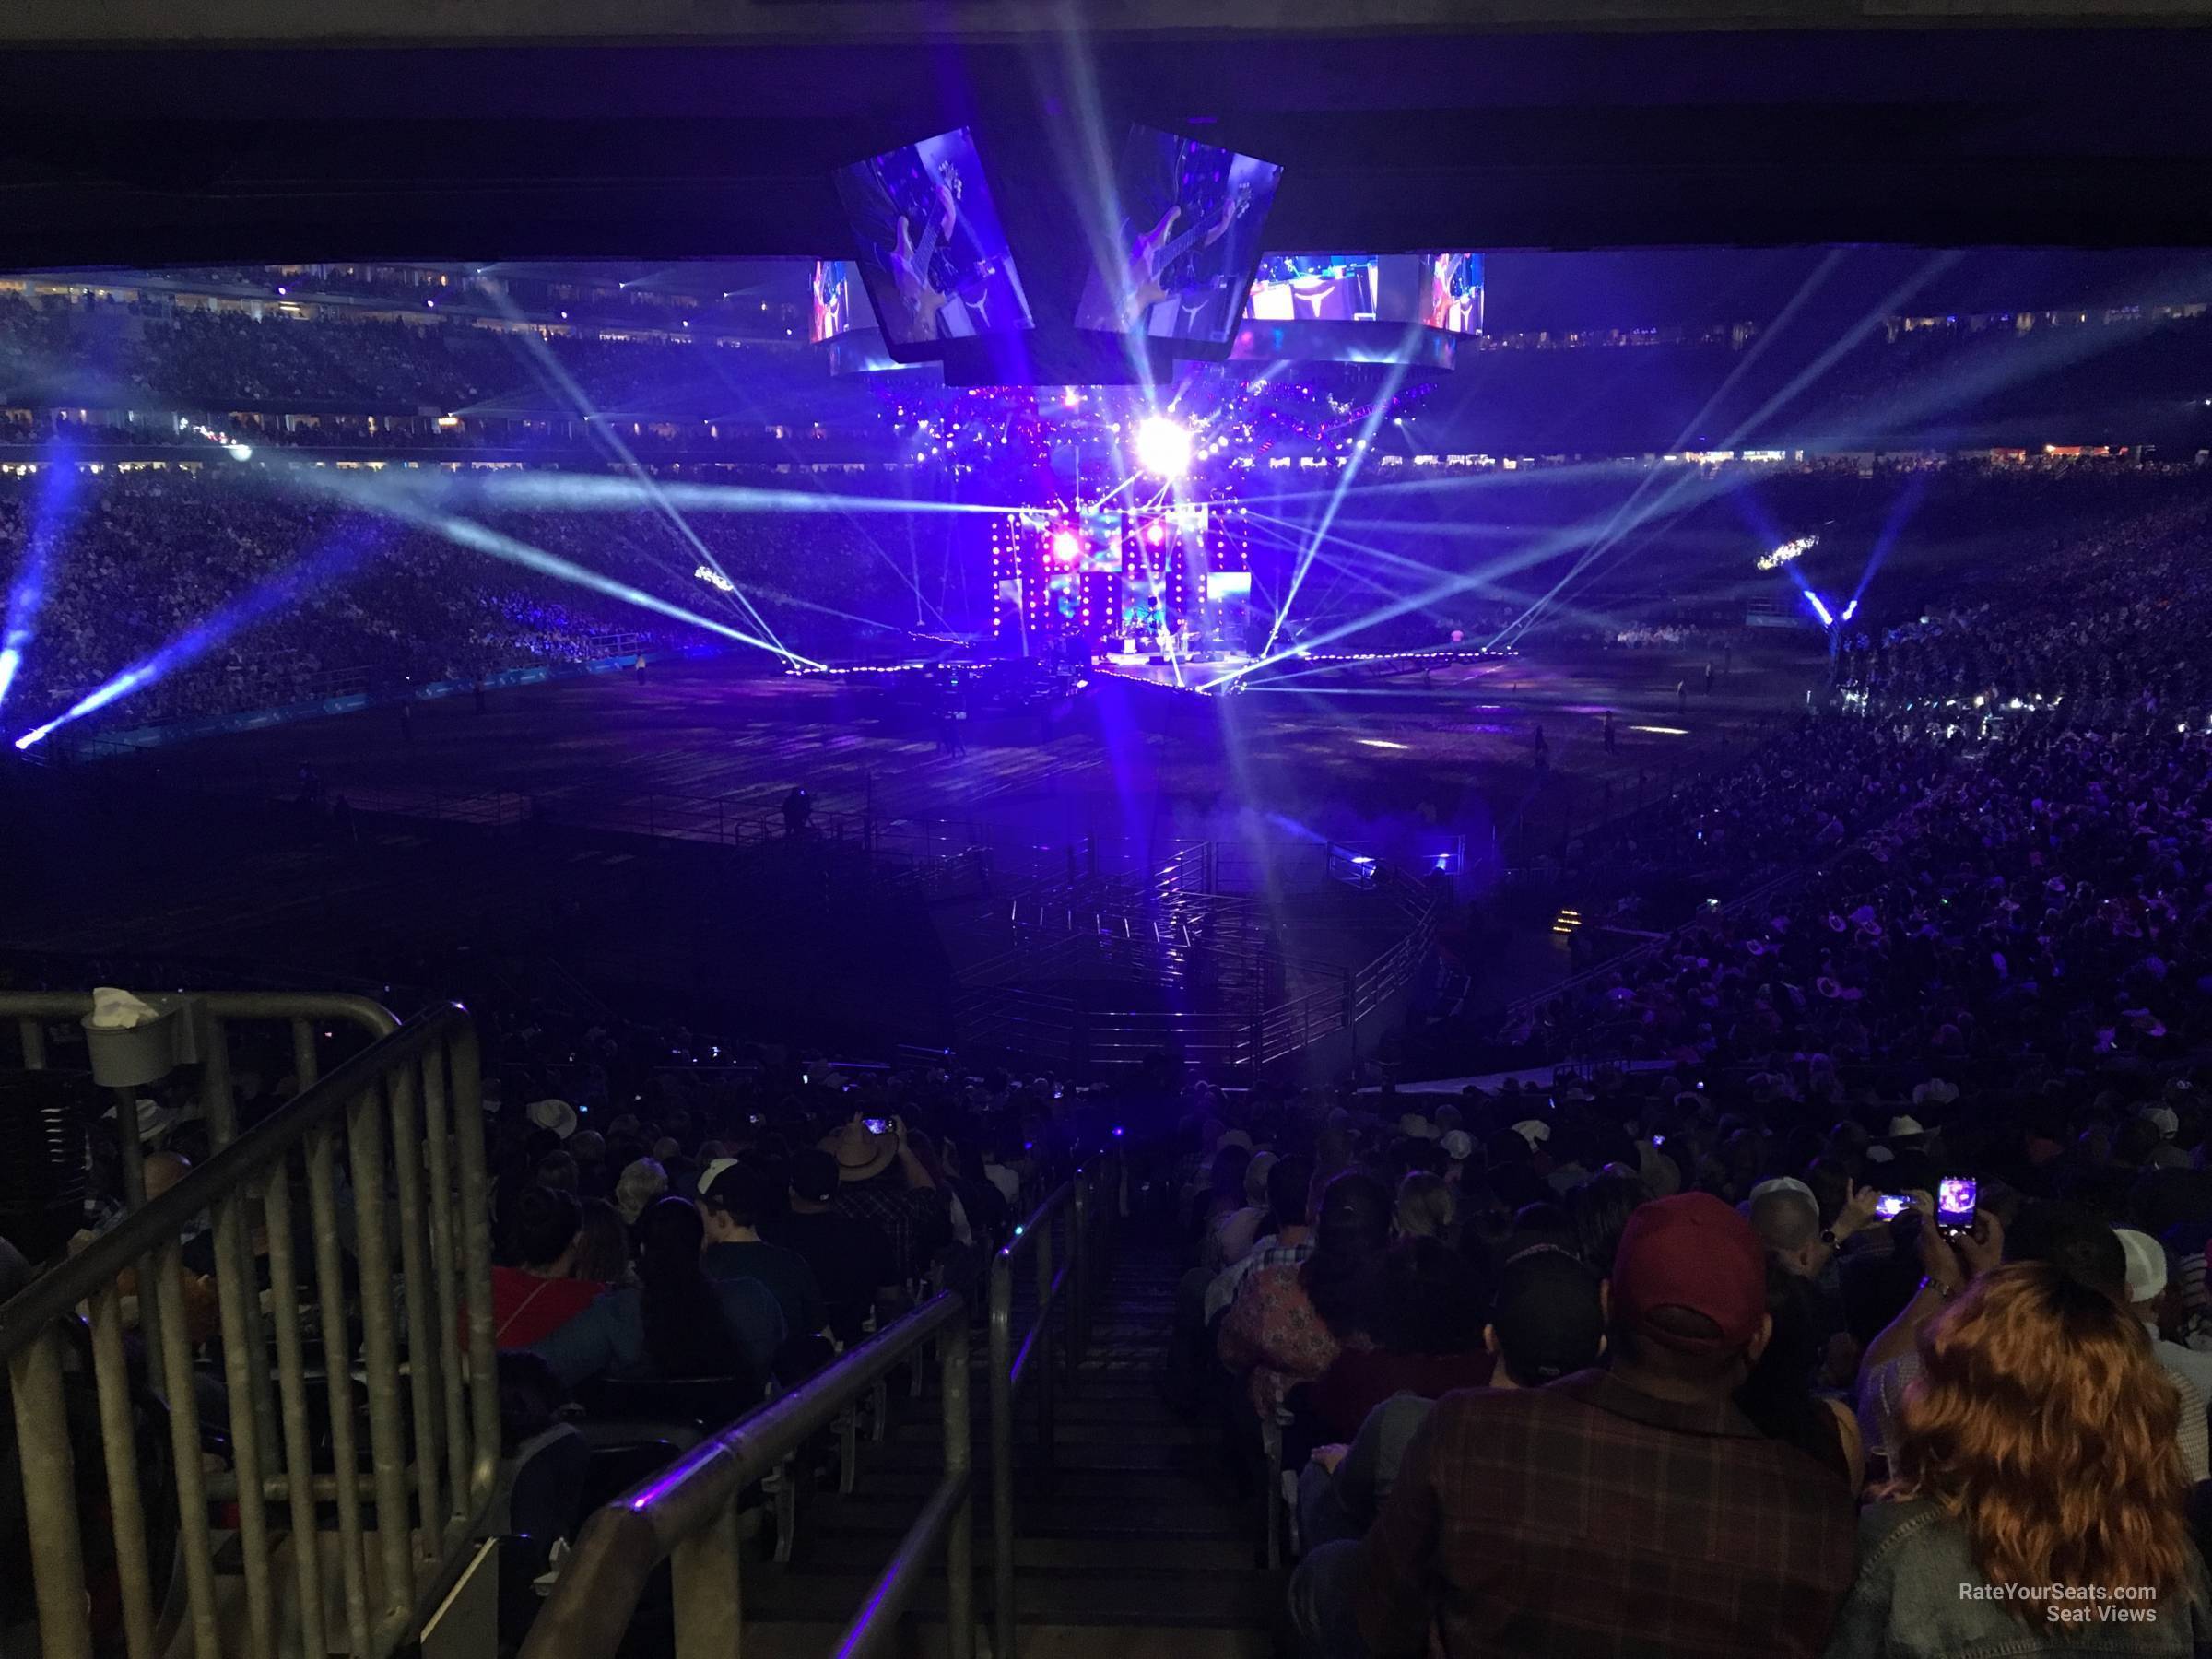 section 134, row hh seat view  for concert - nrg stadium